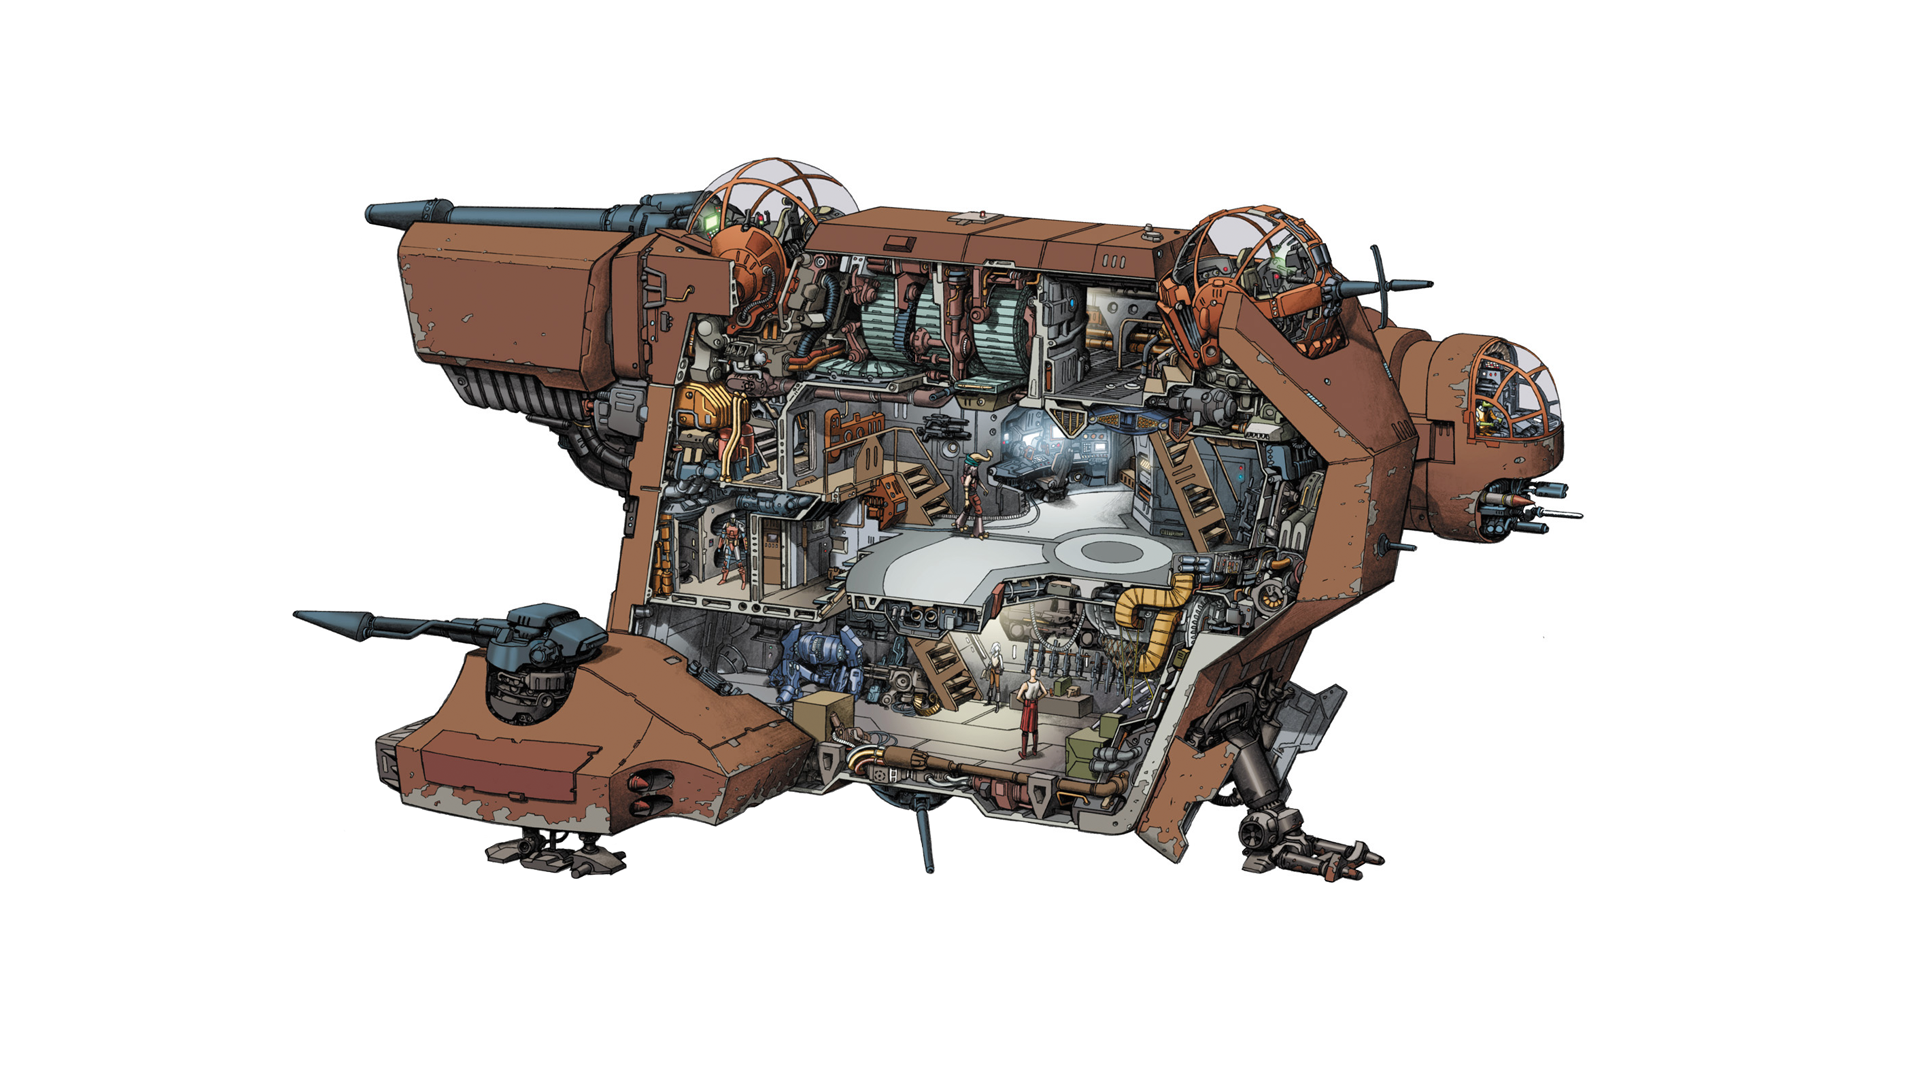 General 1920x1080 vehicle simple background white background cutaway cross section Star Wars digital art Ithorian science fiction